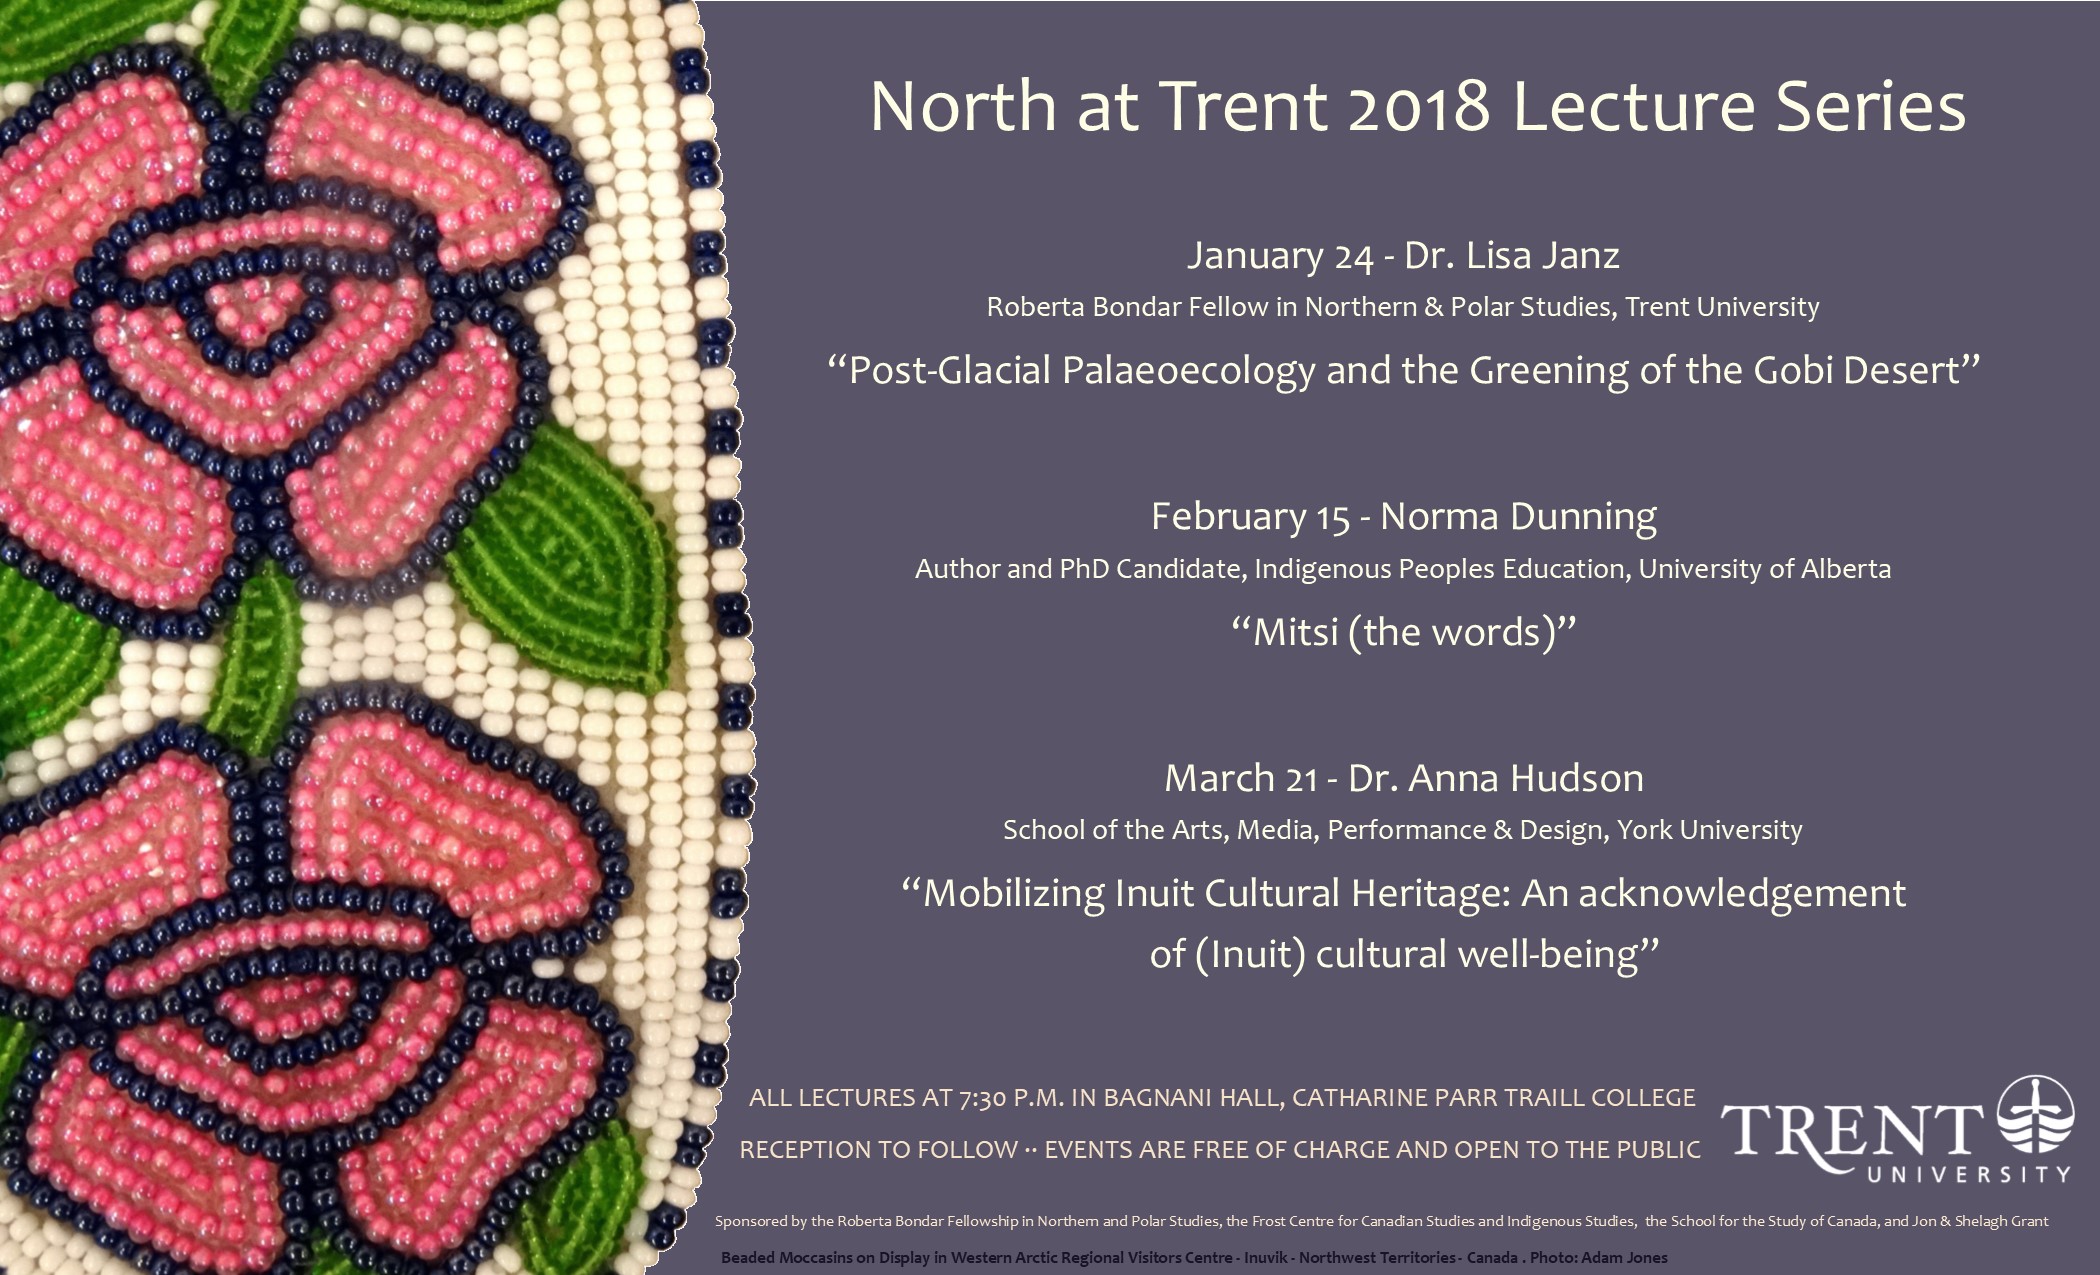 2018 North at Trent Lecture Series with Anna Hudson (March 21), Norma Dunning (February 15) & Lisa Janz (24 January) 